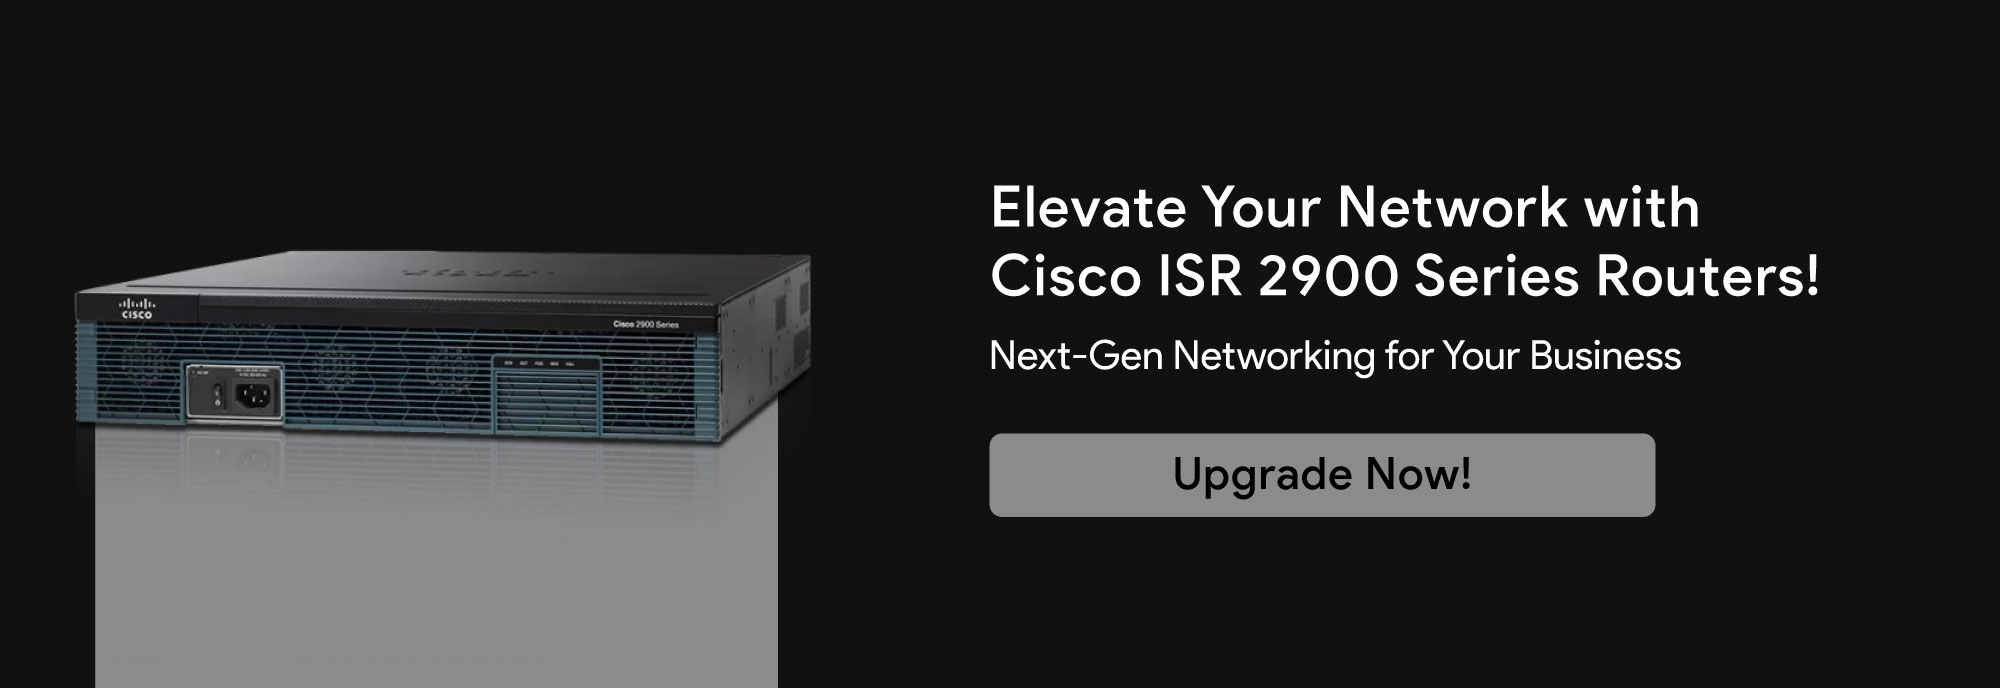 Cisco-ISR-2900-Series-Routers